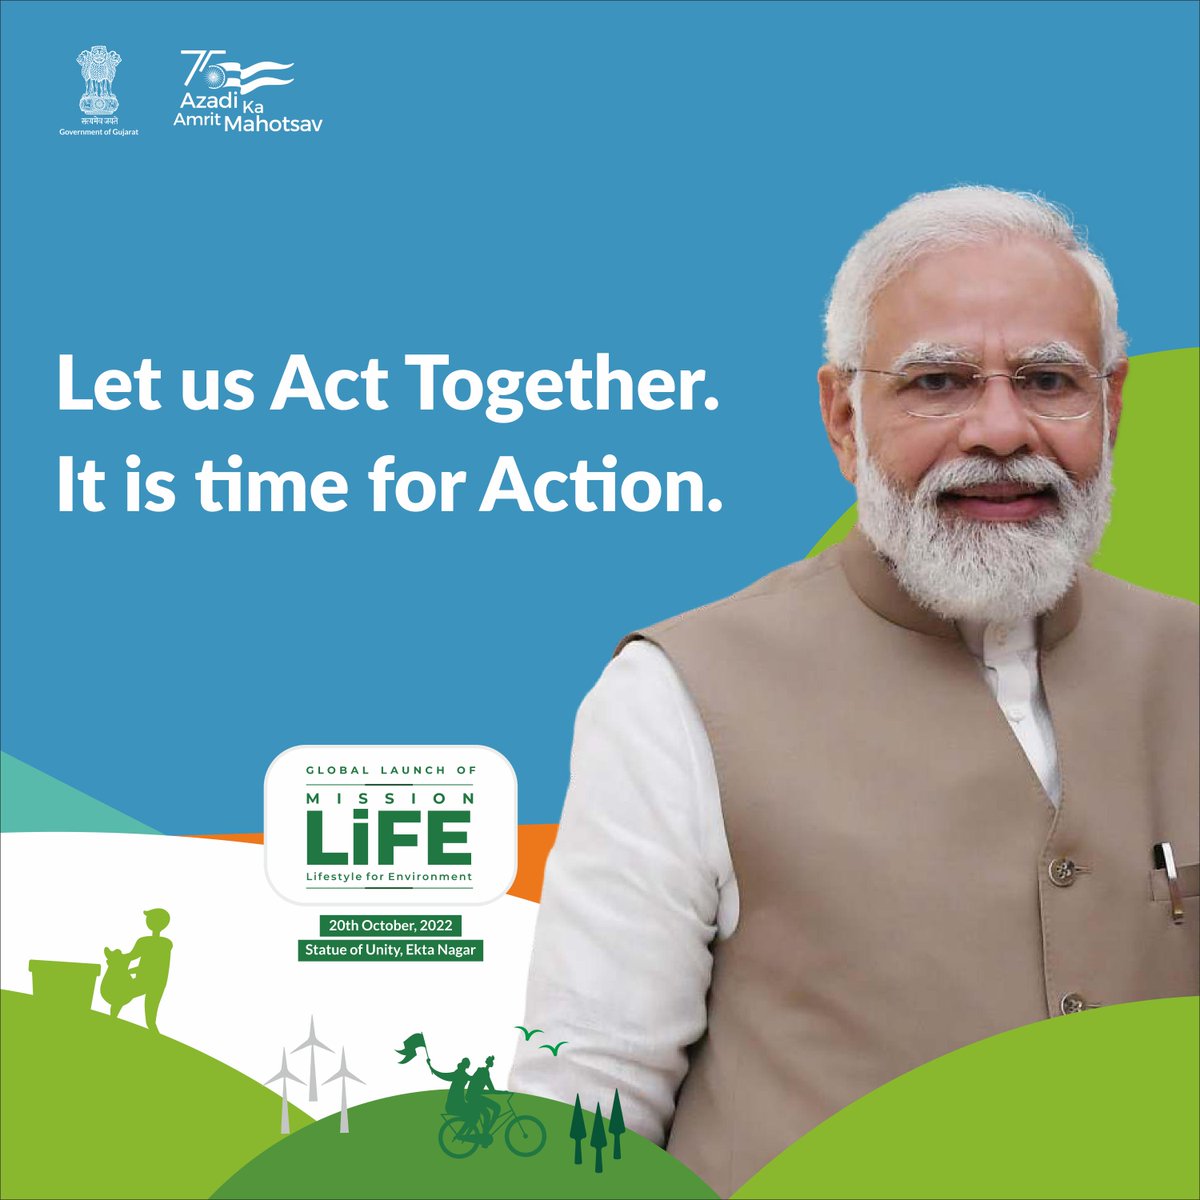 'Let us Act Together. It is time for Action.' Honourable Prime Minister of India @narendramodi will be launching Mission #LiFE today at @souindia in presence of @UN Secretary General @antonioguterres. #LiFE #Gujarat